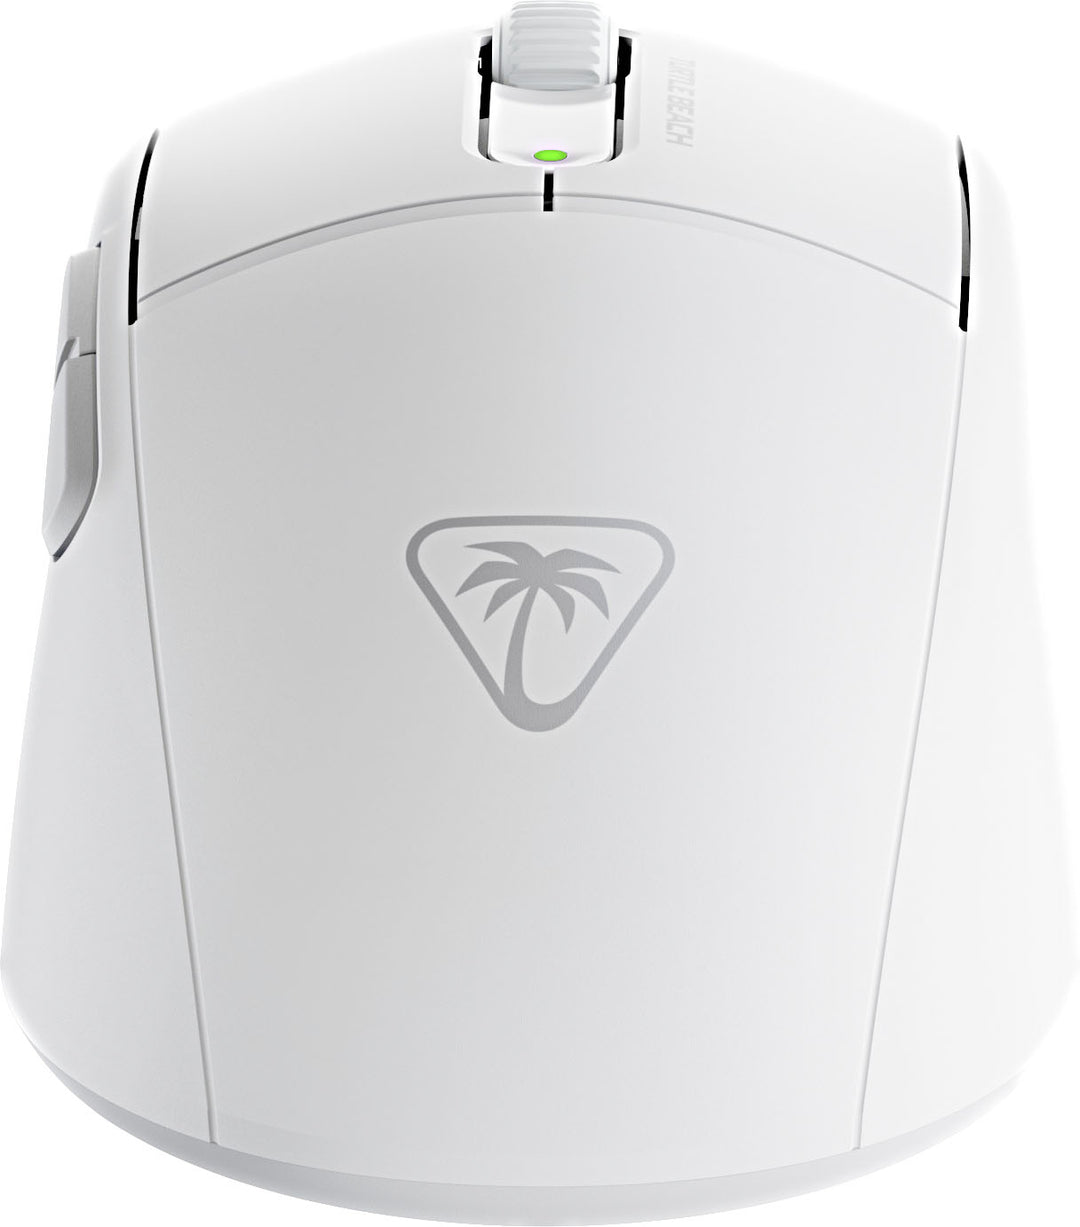 Turtle Beach - Burst II Air Ultra Lightweight Wireless Symmetrical Gaming Mouse with Bluetooth & 120-hour battery - White_3